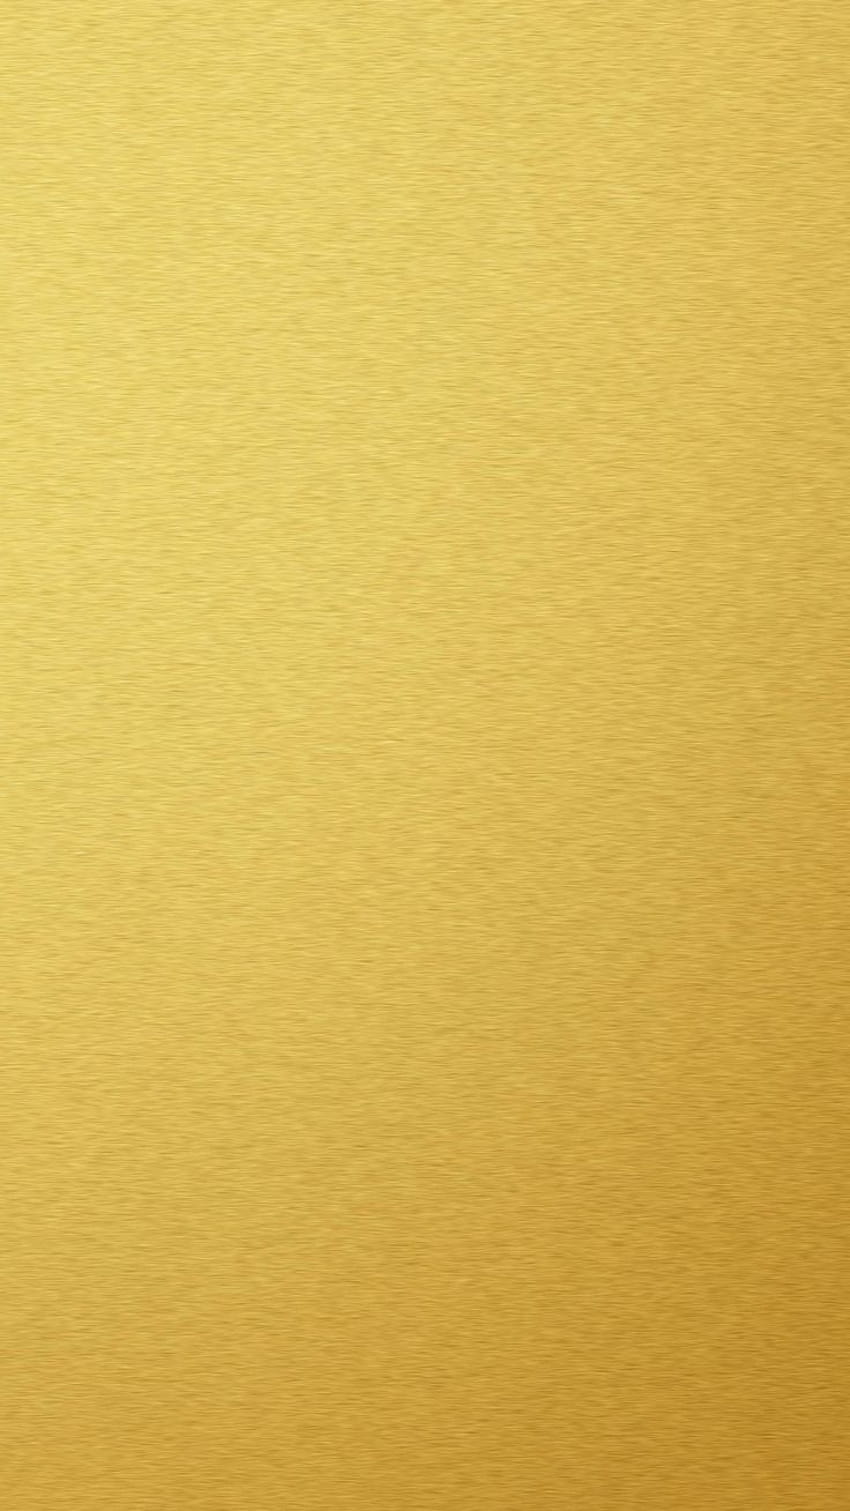 Plain Gold iPhone, solid gold HD phone wallpaper